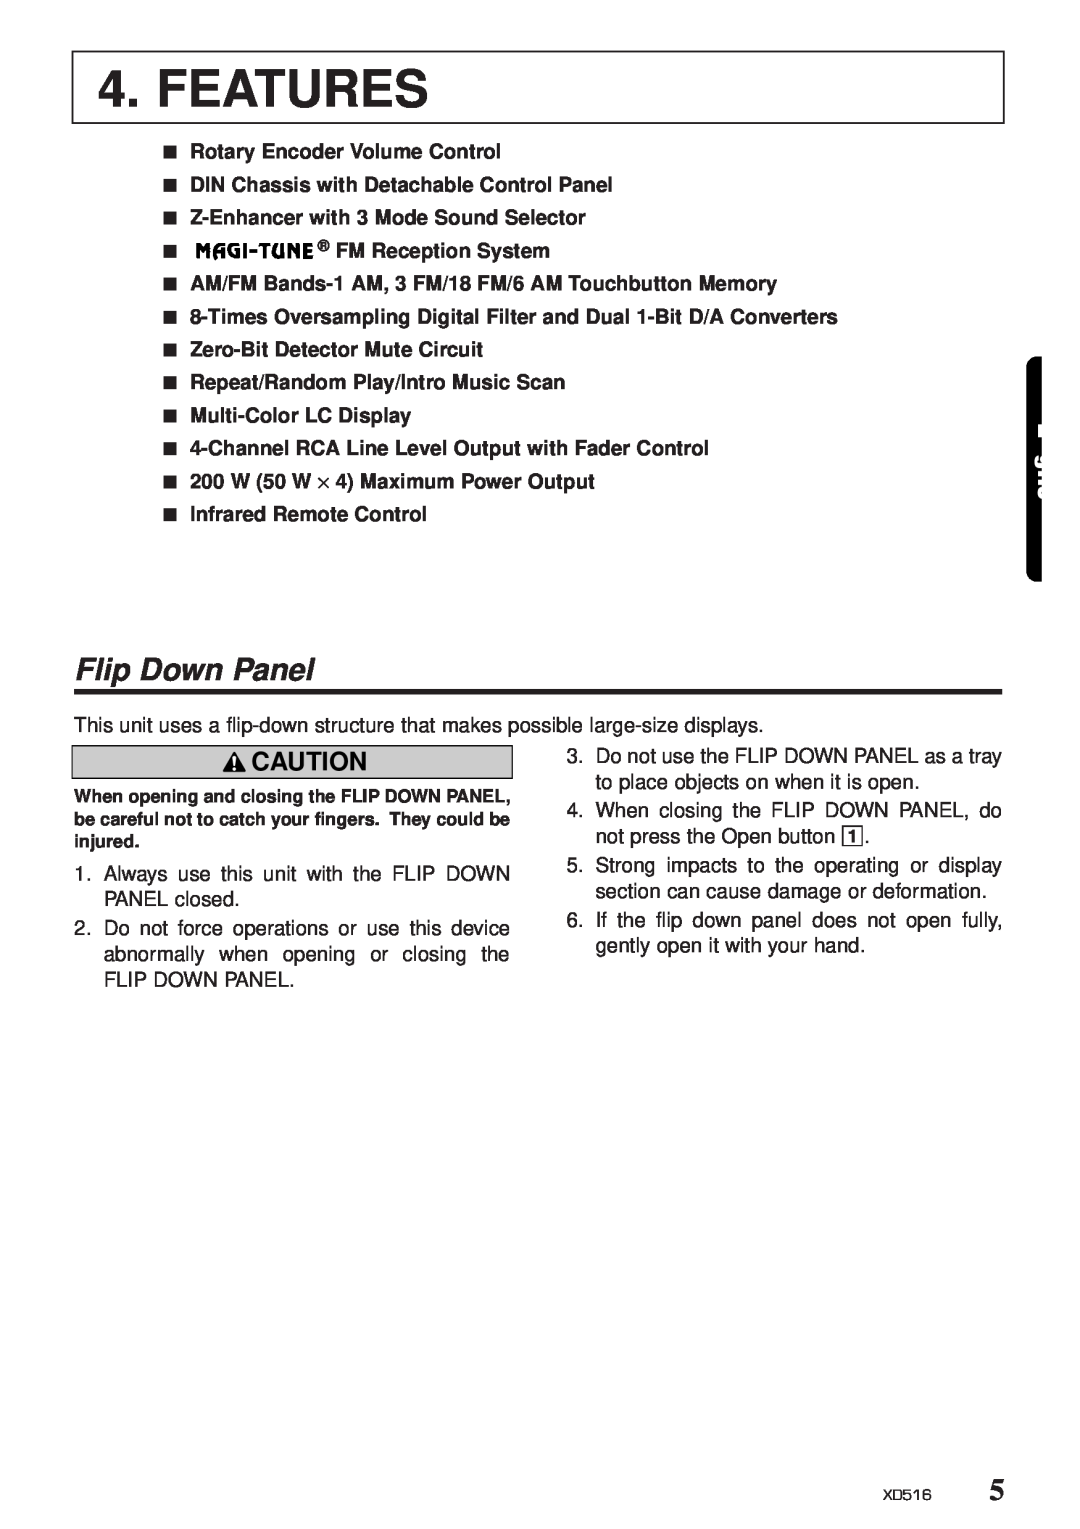 Clarion XD516 owner manual Features, Flip Down Panel 